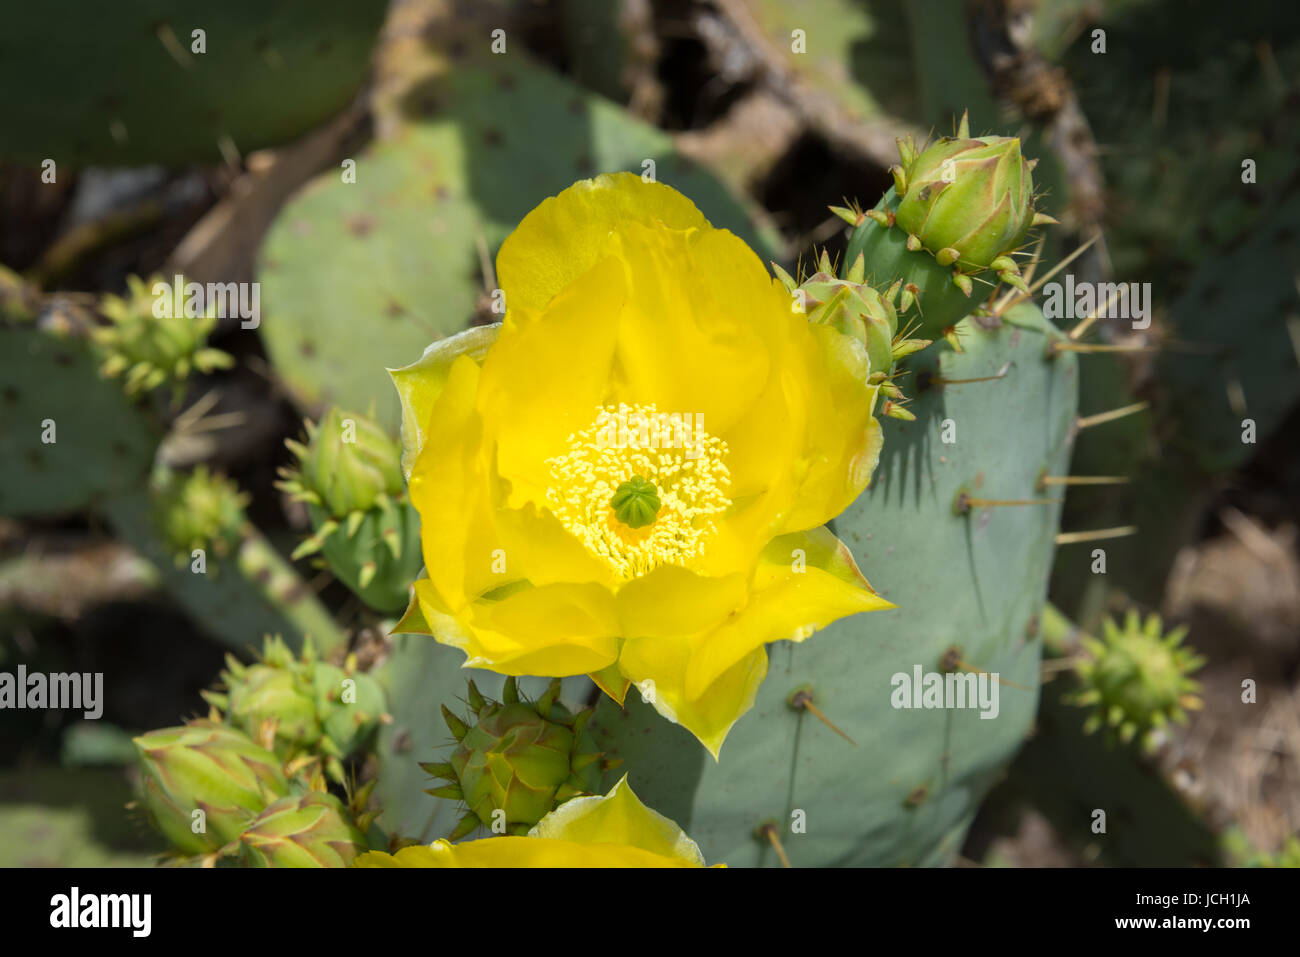 A single, yellow, Prickly Pear cactus ((Opuntia humifusa)) flower in full bloom. Stock Photo